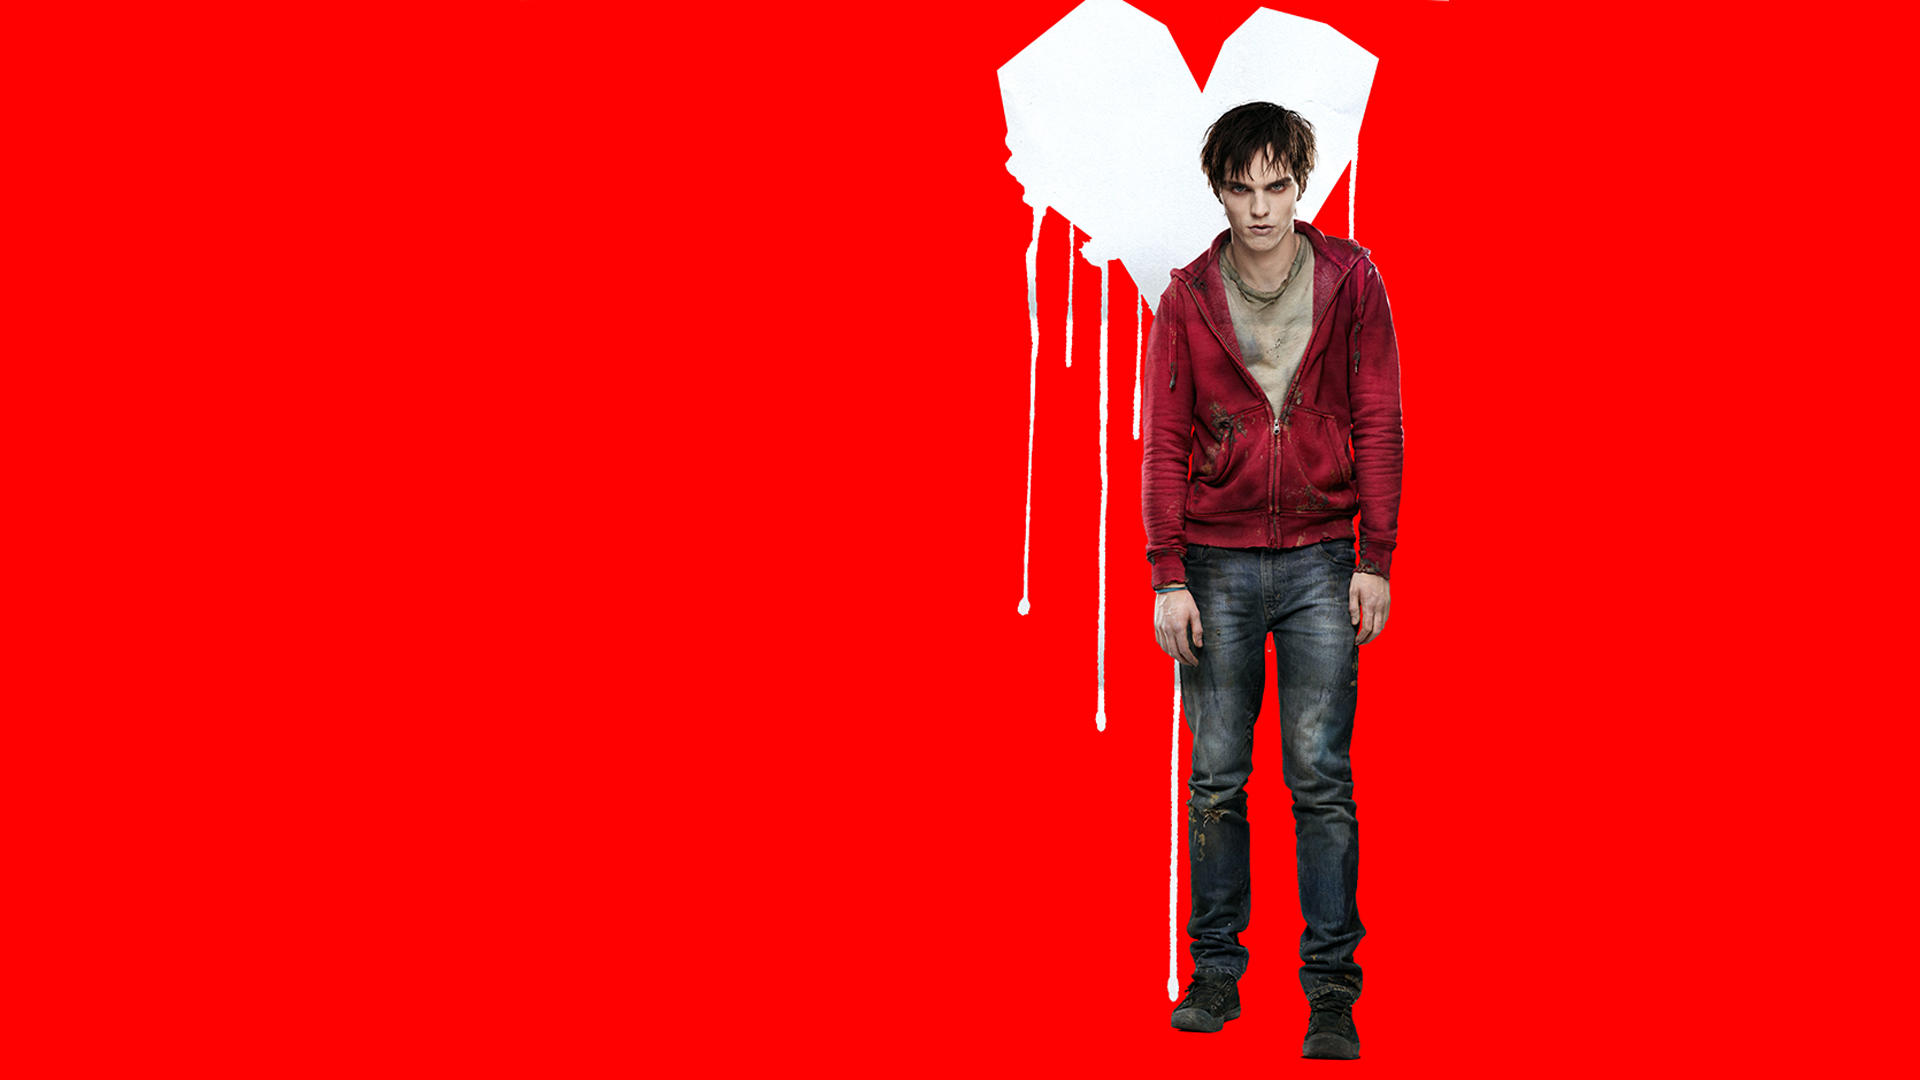 Cool Backgrounds  Warm Bodies